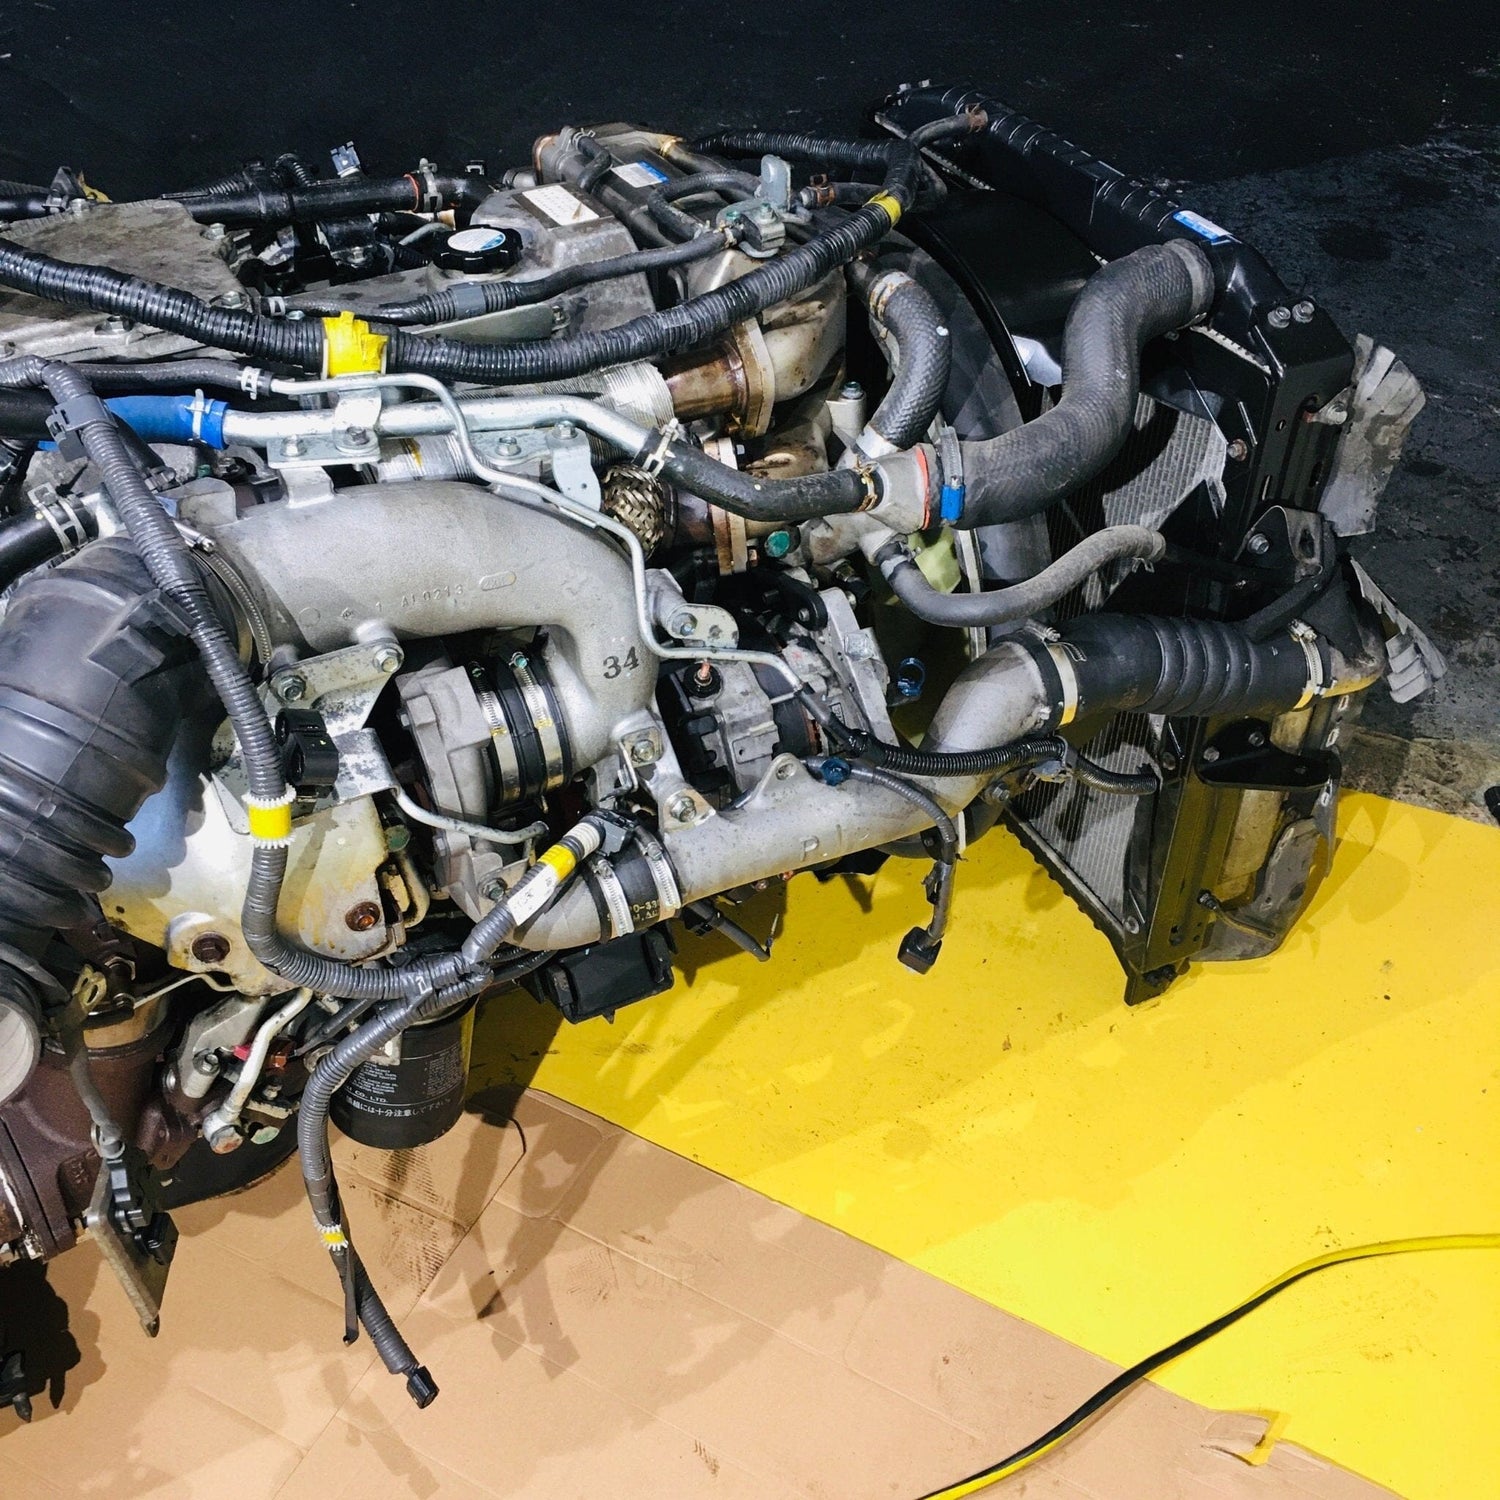 Hino Ranger 500 Series 7.0l 5 Cylinder Turbo Diesel Rwd Complete Engine Swap With 5 Speed Manual - J07E